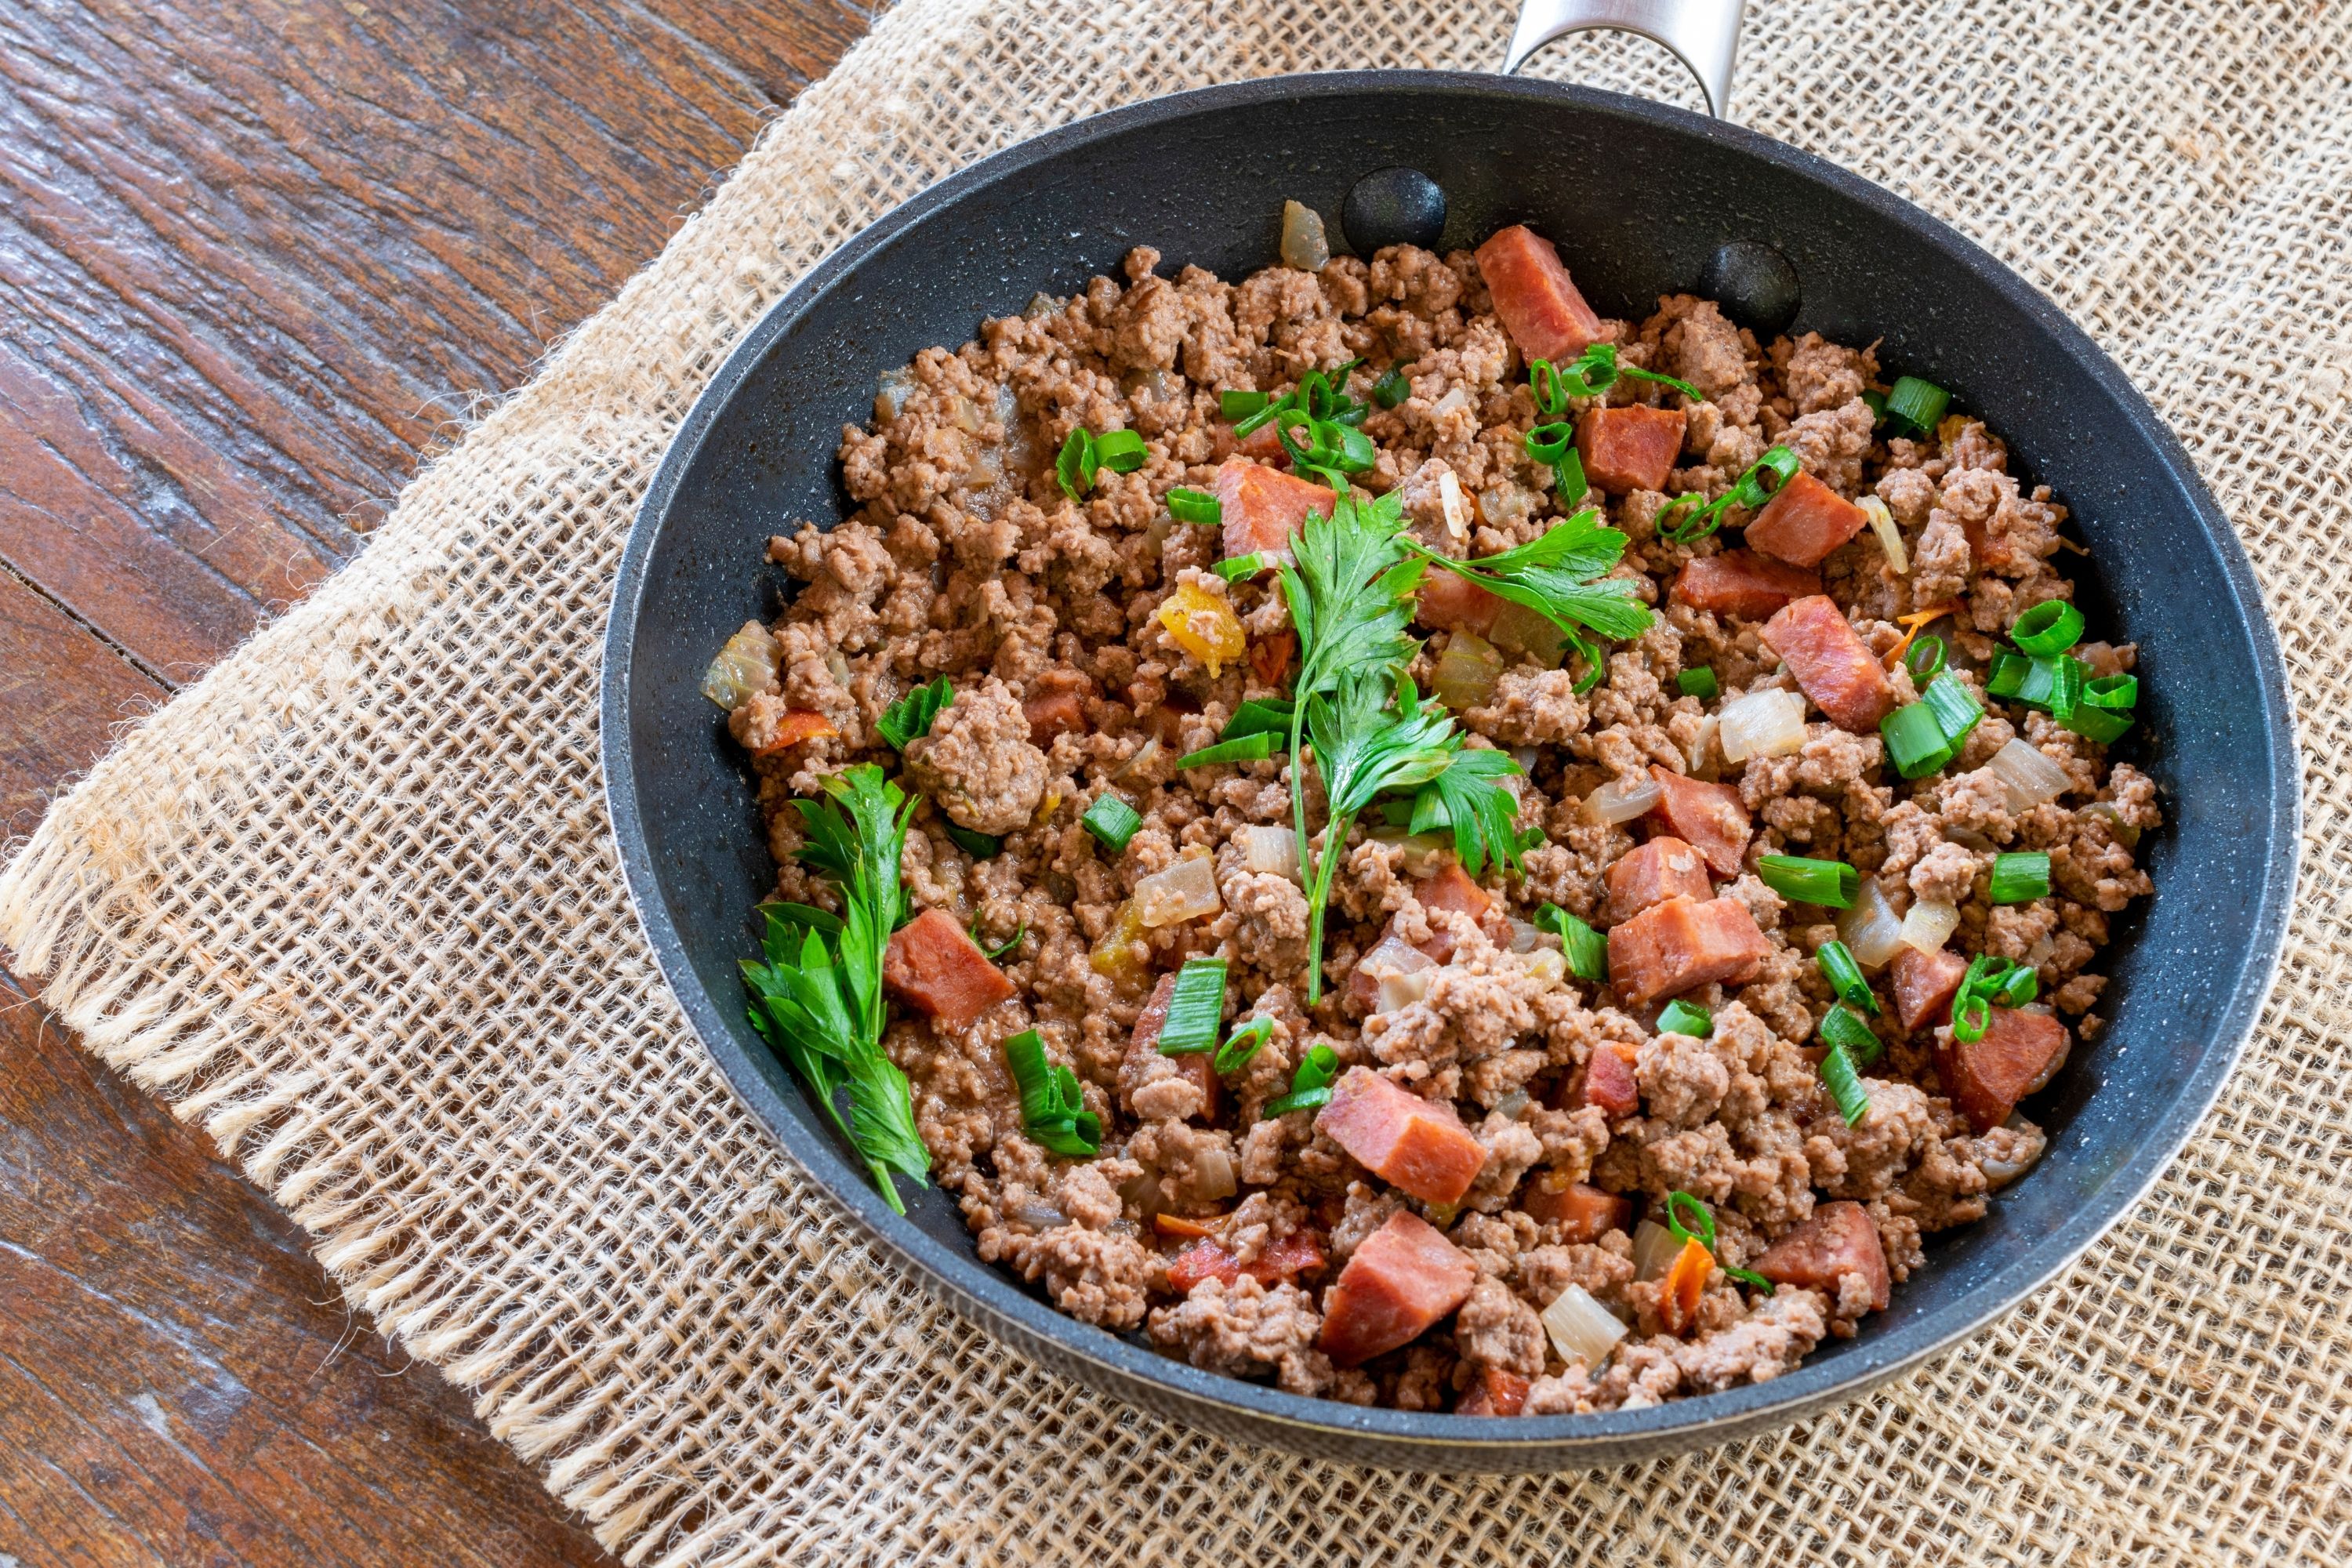 How to Handle Ground Beef Safely